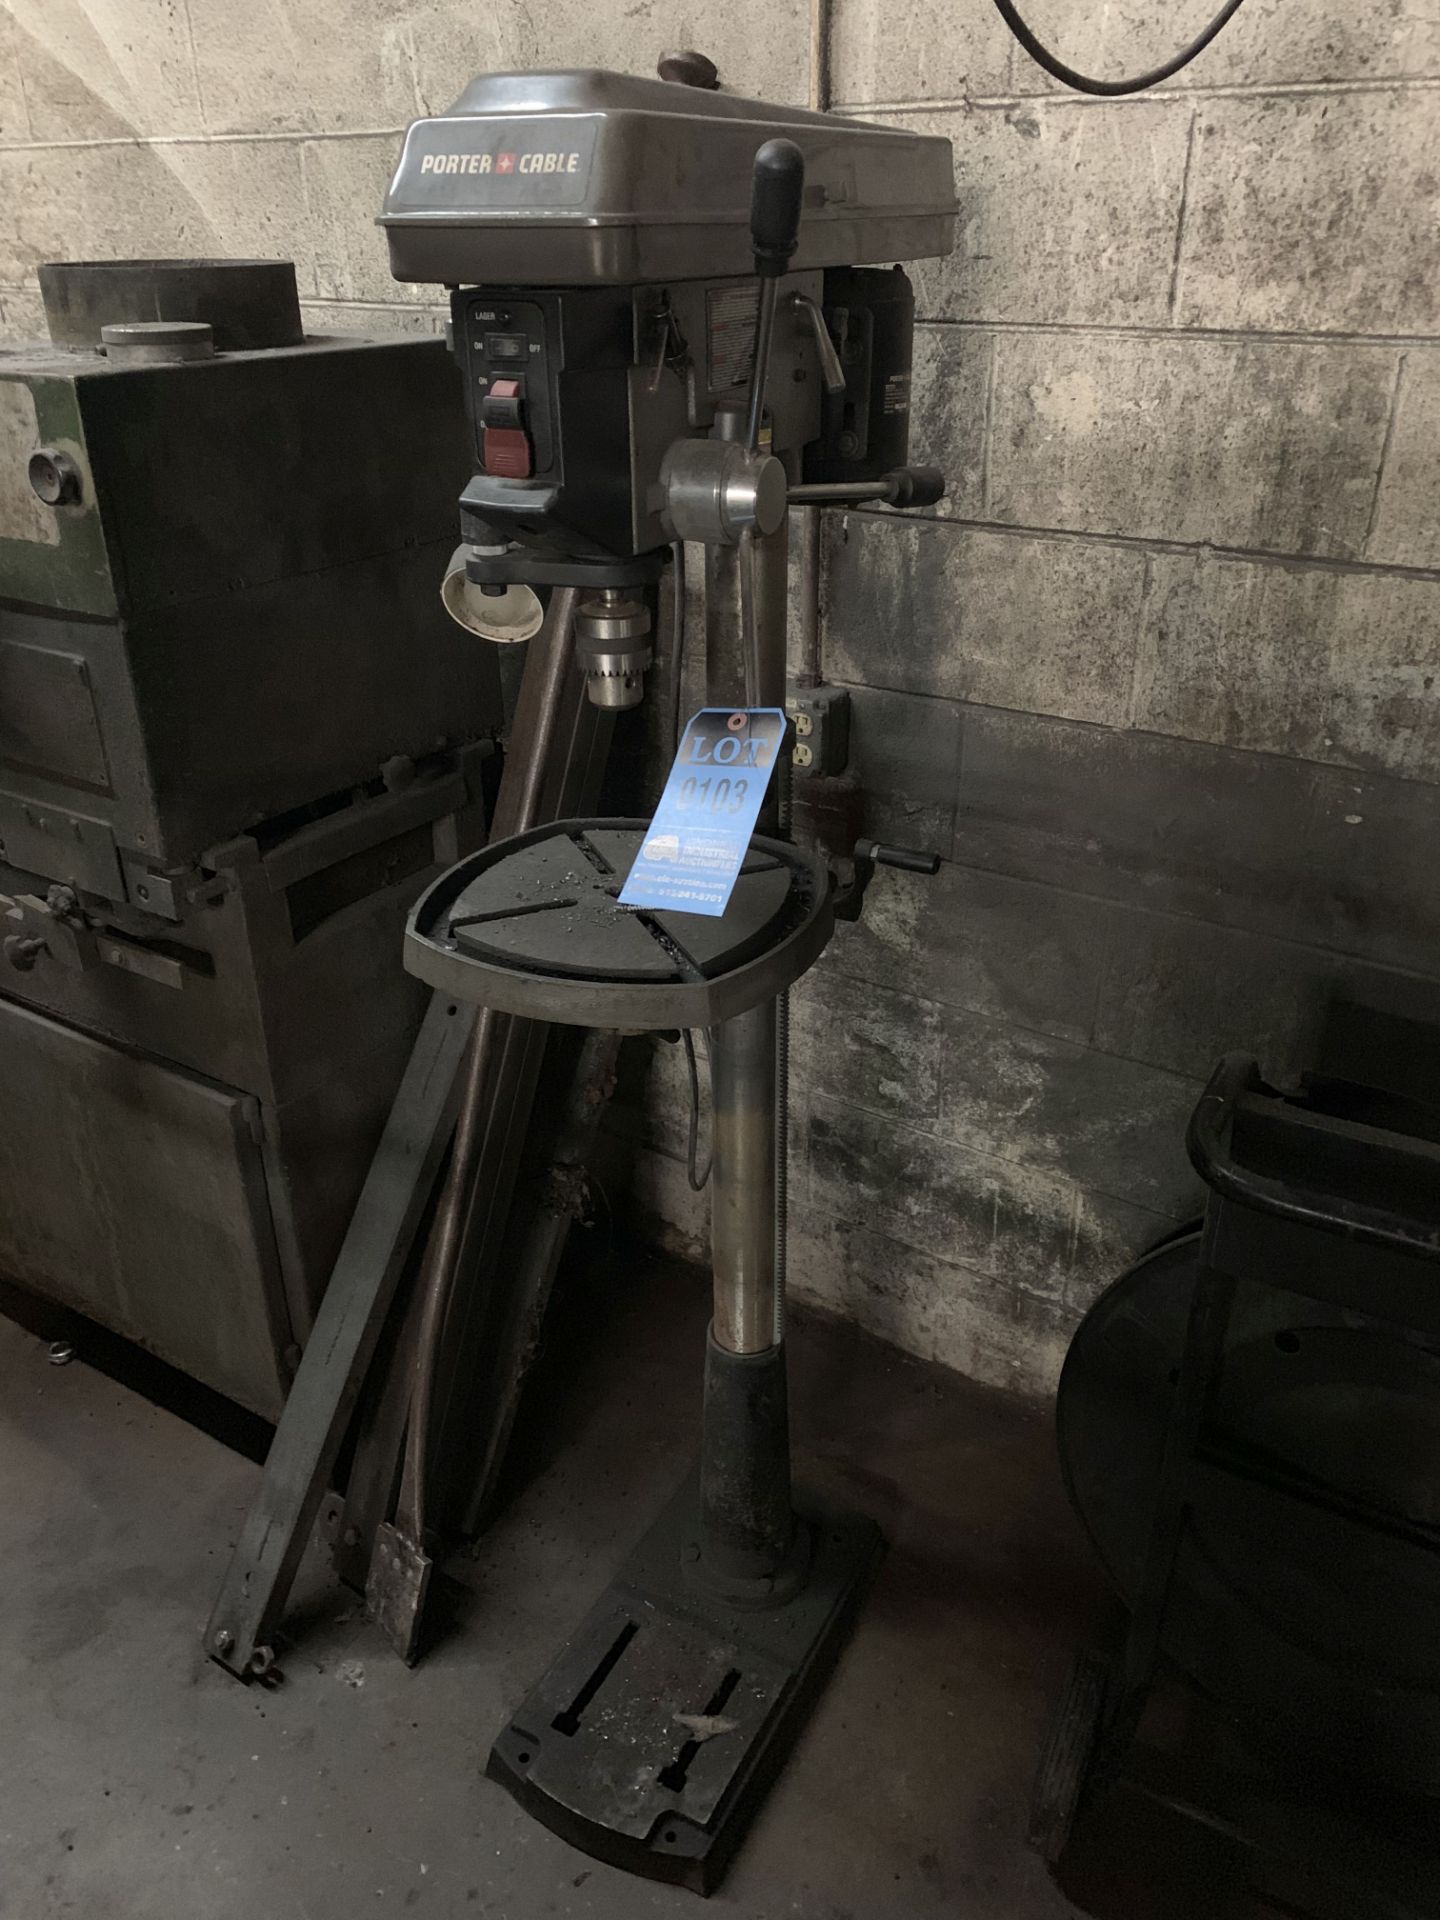 16" PORTER CABLE FLOOR DRILL **LOCATED AT 111 W. WESTCOTT WAY**